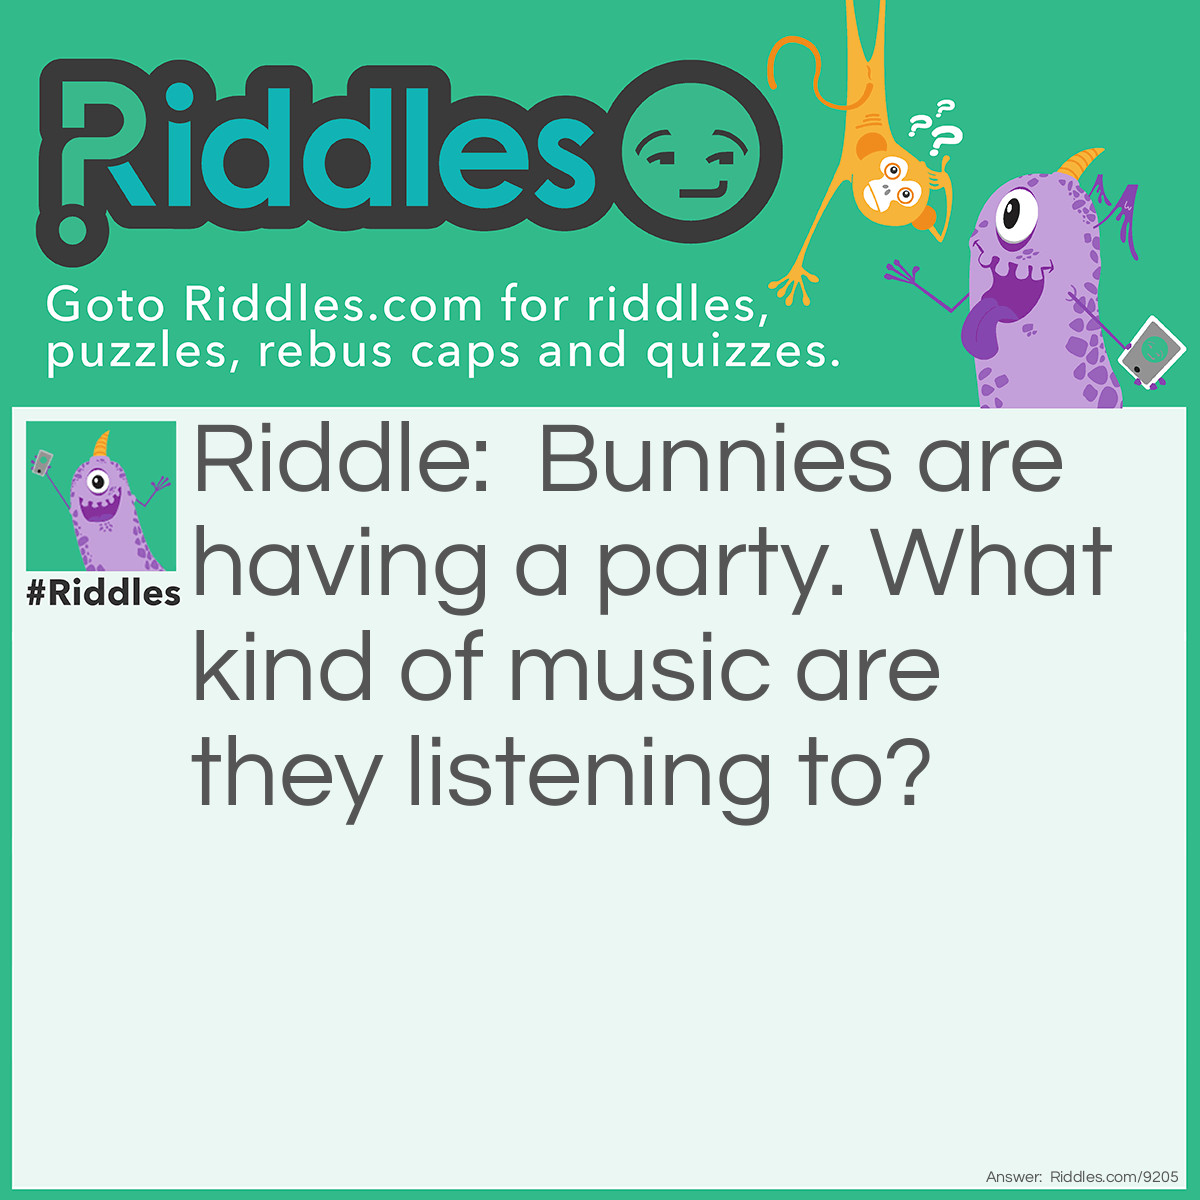 Riddle: Bunnies are having a party. What kind of music are they listening to? Answer: Hip-hop.